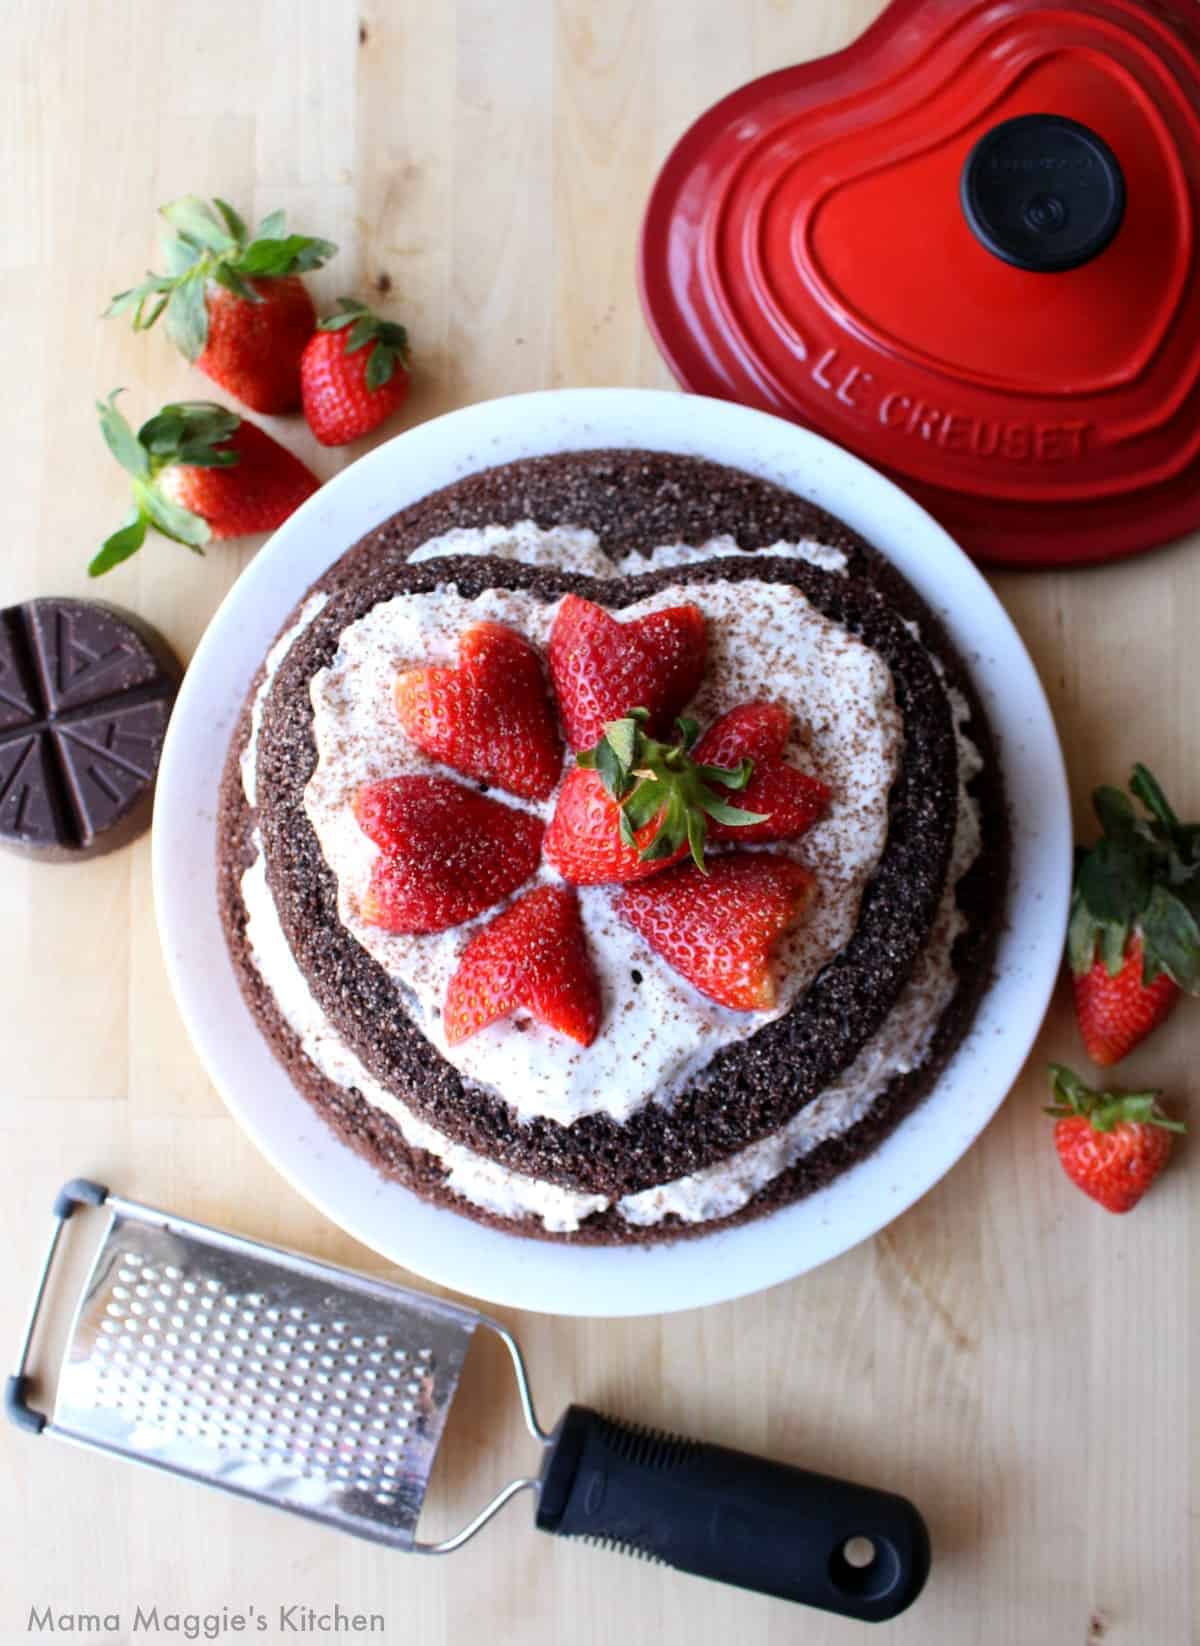  Mexican Chocolate Cake